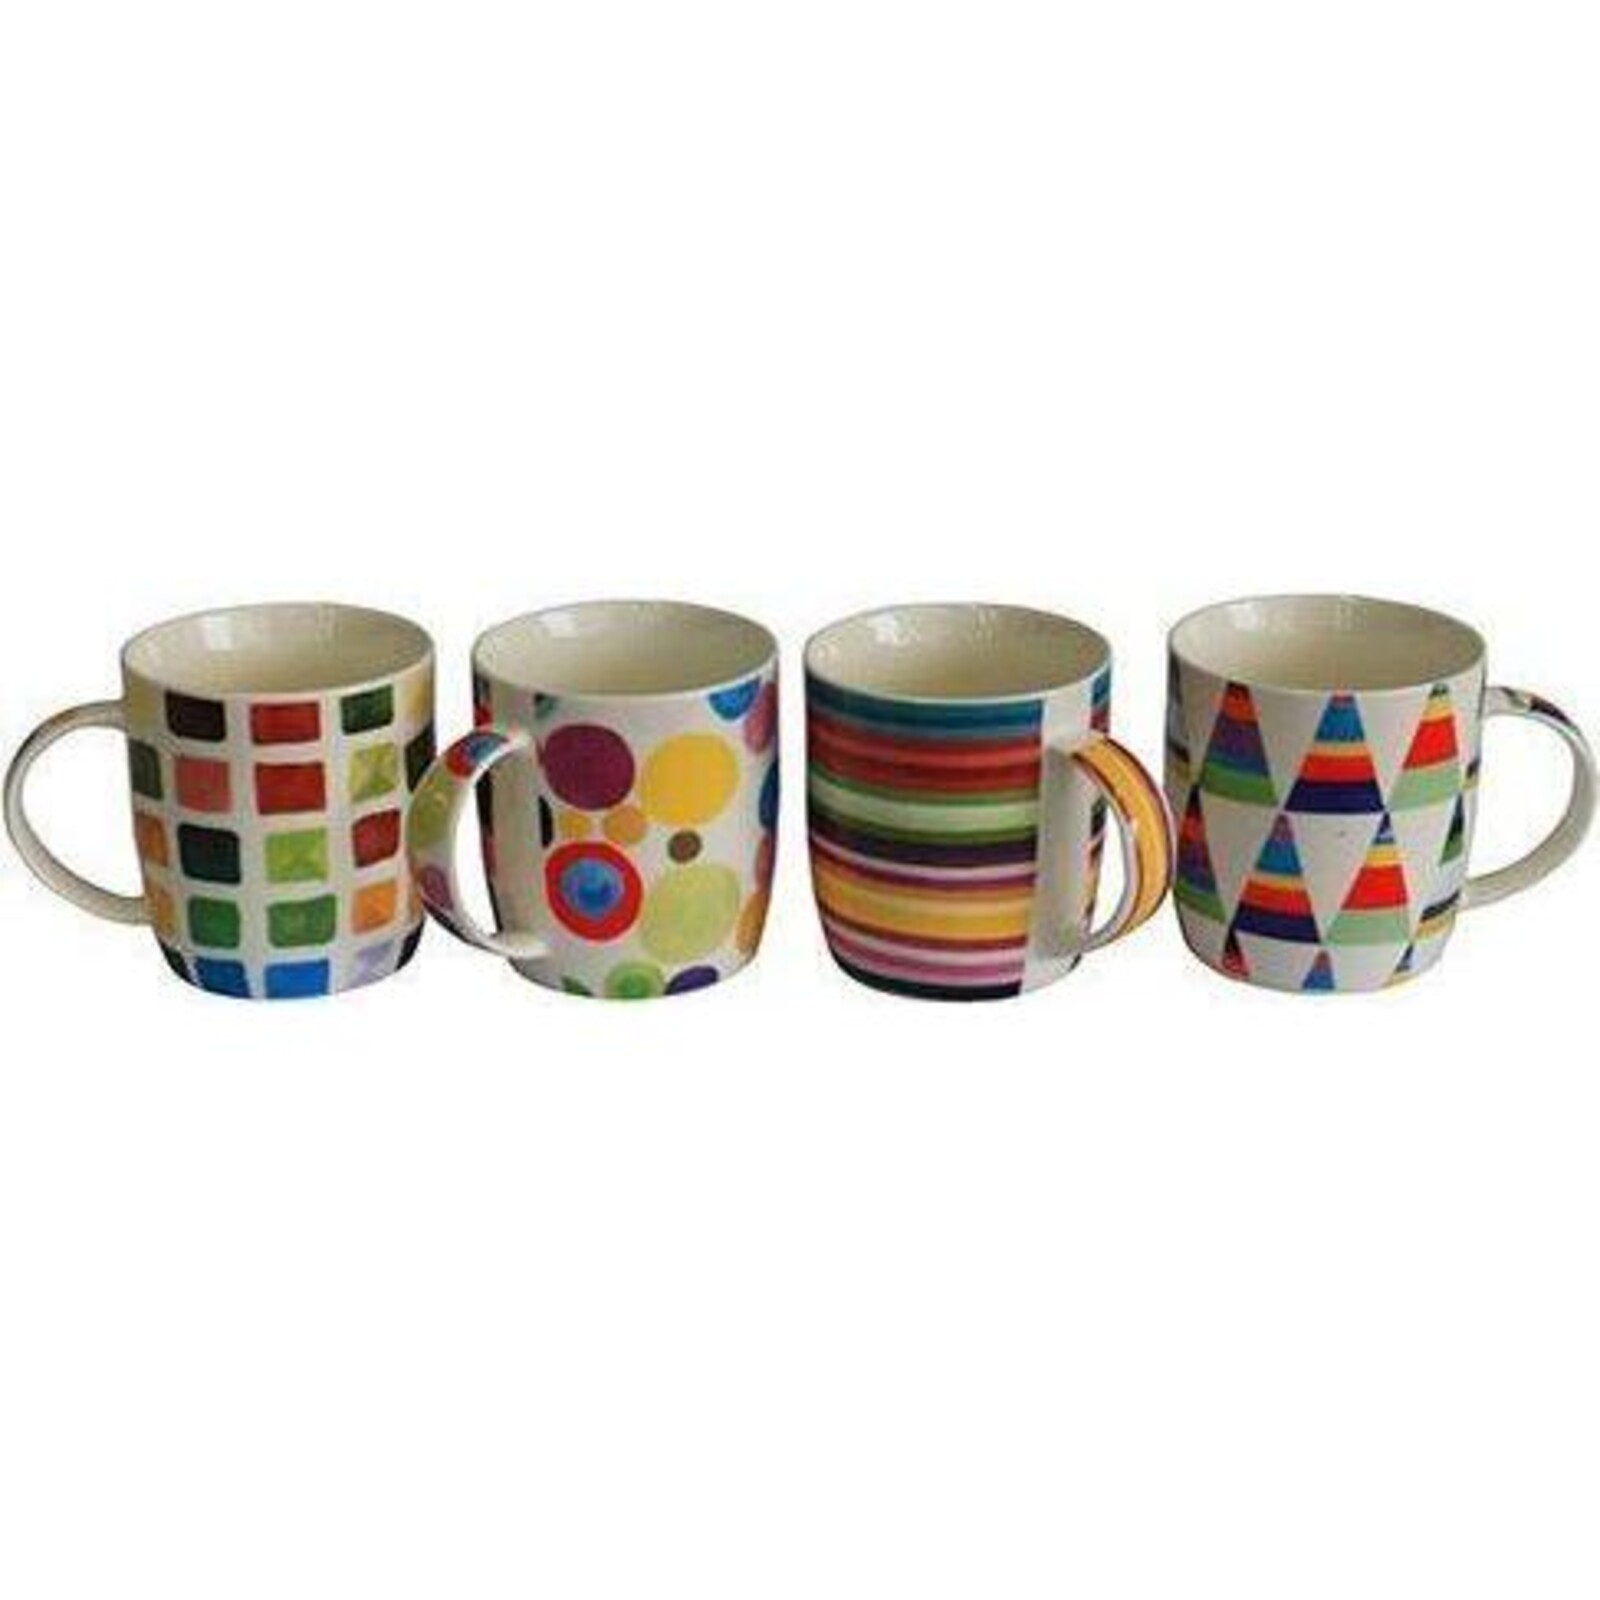 Coffee mugs Painted Colour 4 Asst